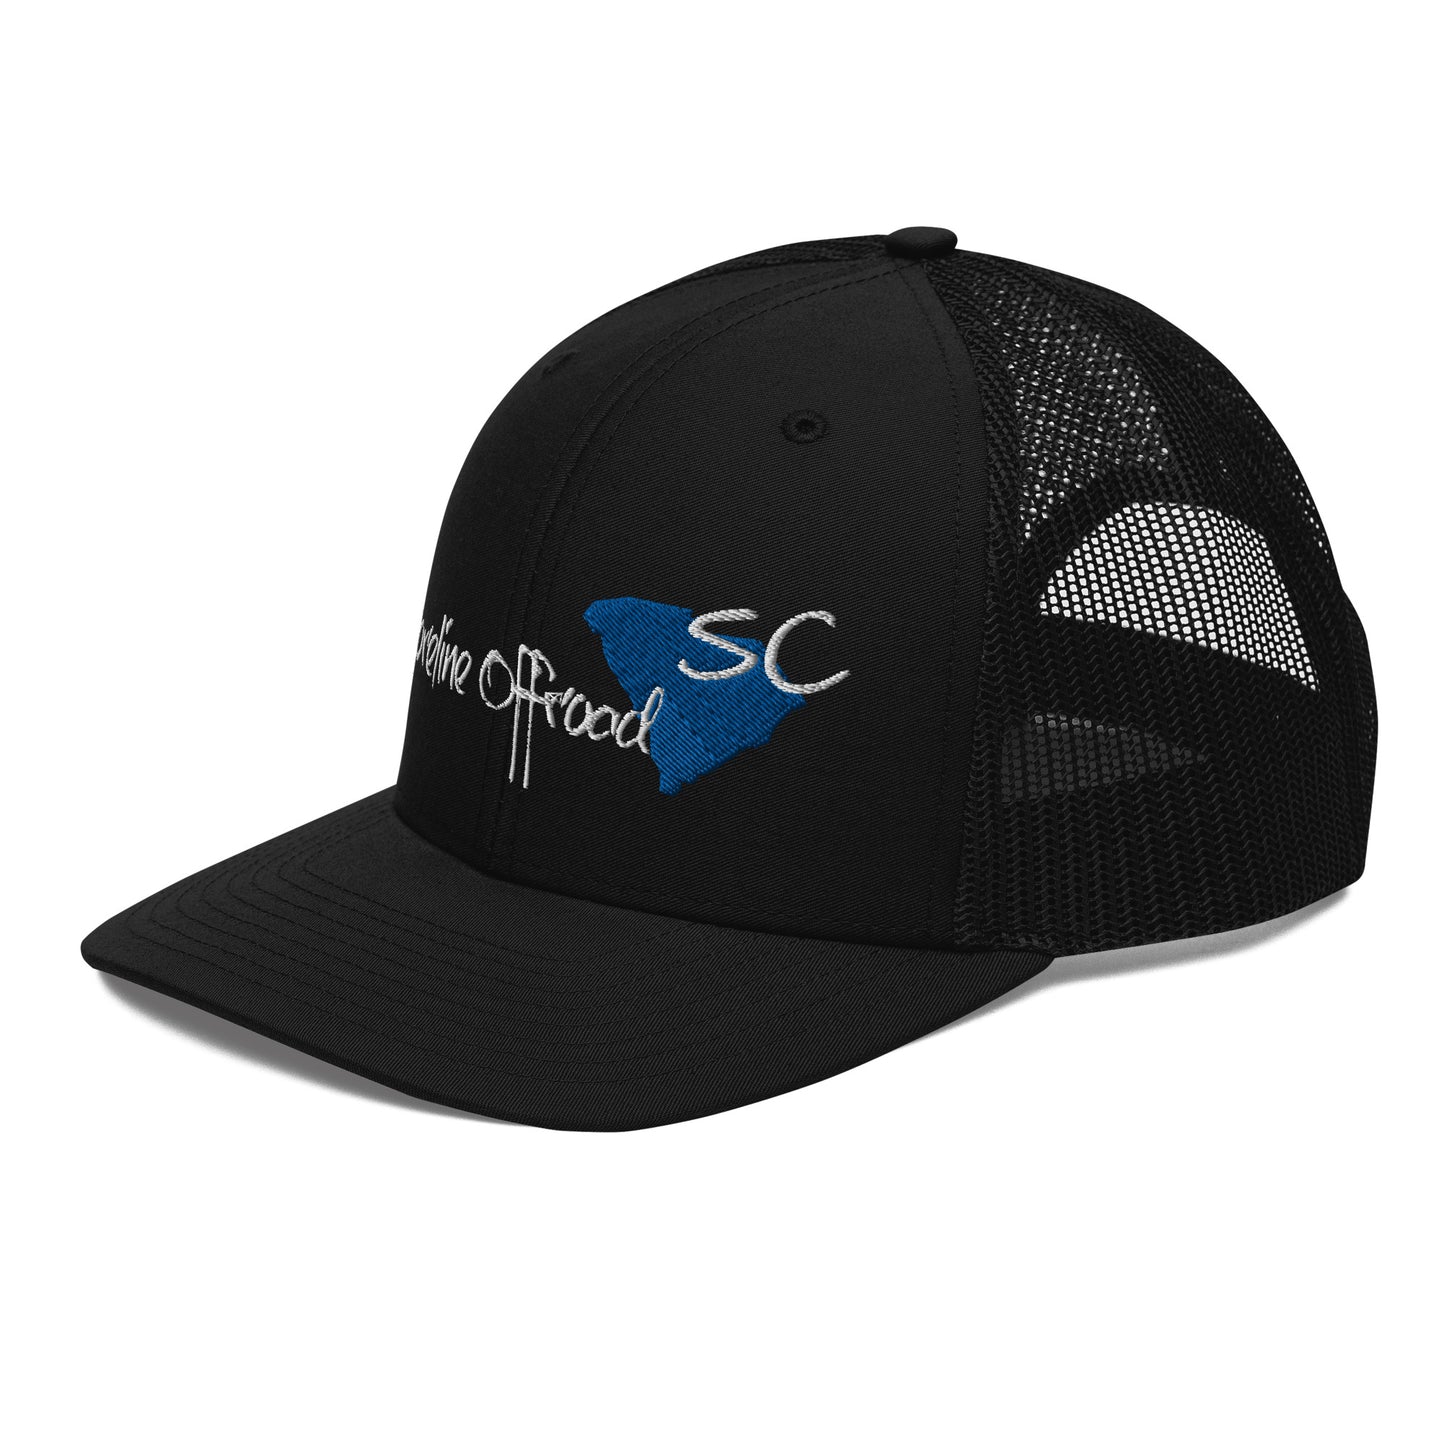 a black trucker hat with the logo of the school